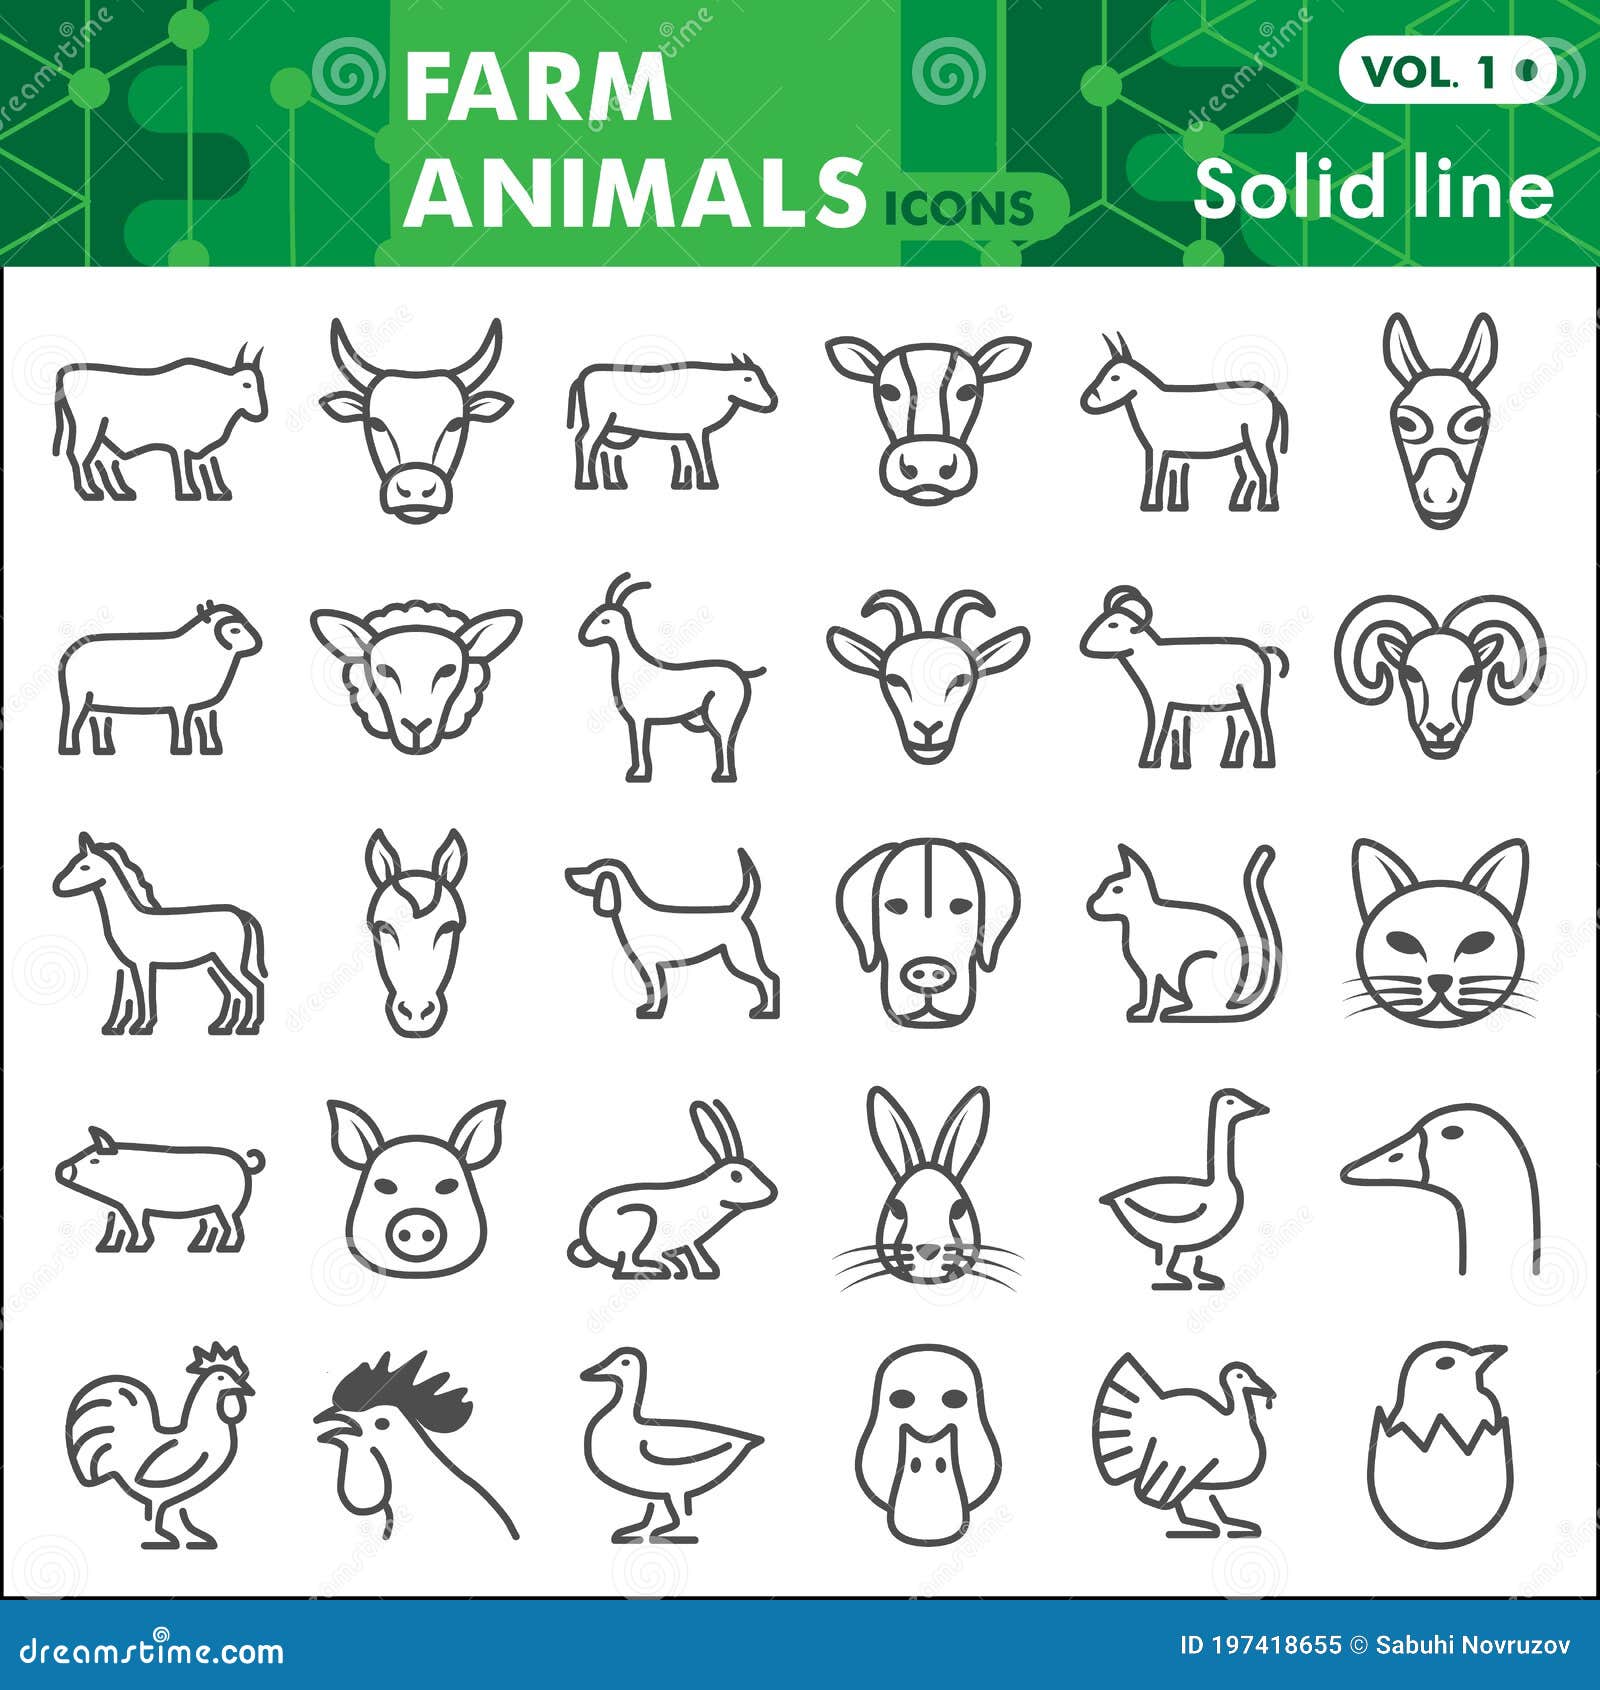 Farm Animals Line Icon Set, Home Animal Symbols Collection or Sketches.  Animals from a Farm Linear Style Signs for Web Stock Vector - Illustration  of agriculture, farm: 197418655